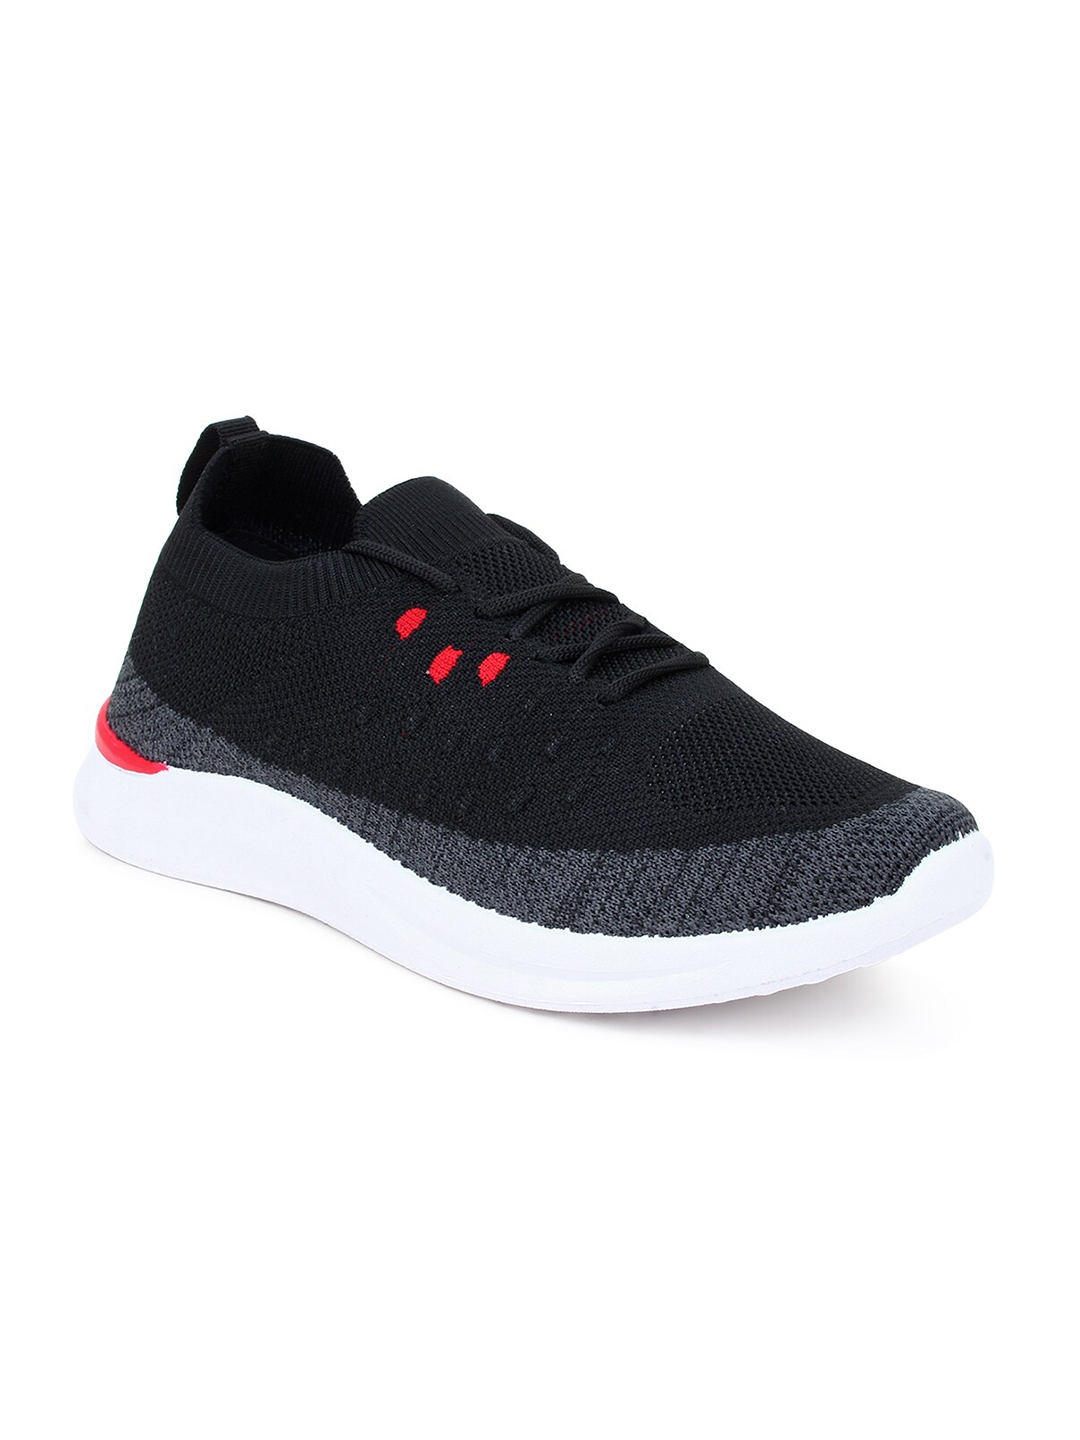 Buy Champs Men Black Mesh Running Non Marking Shoes - Sports Shoes for ...